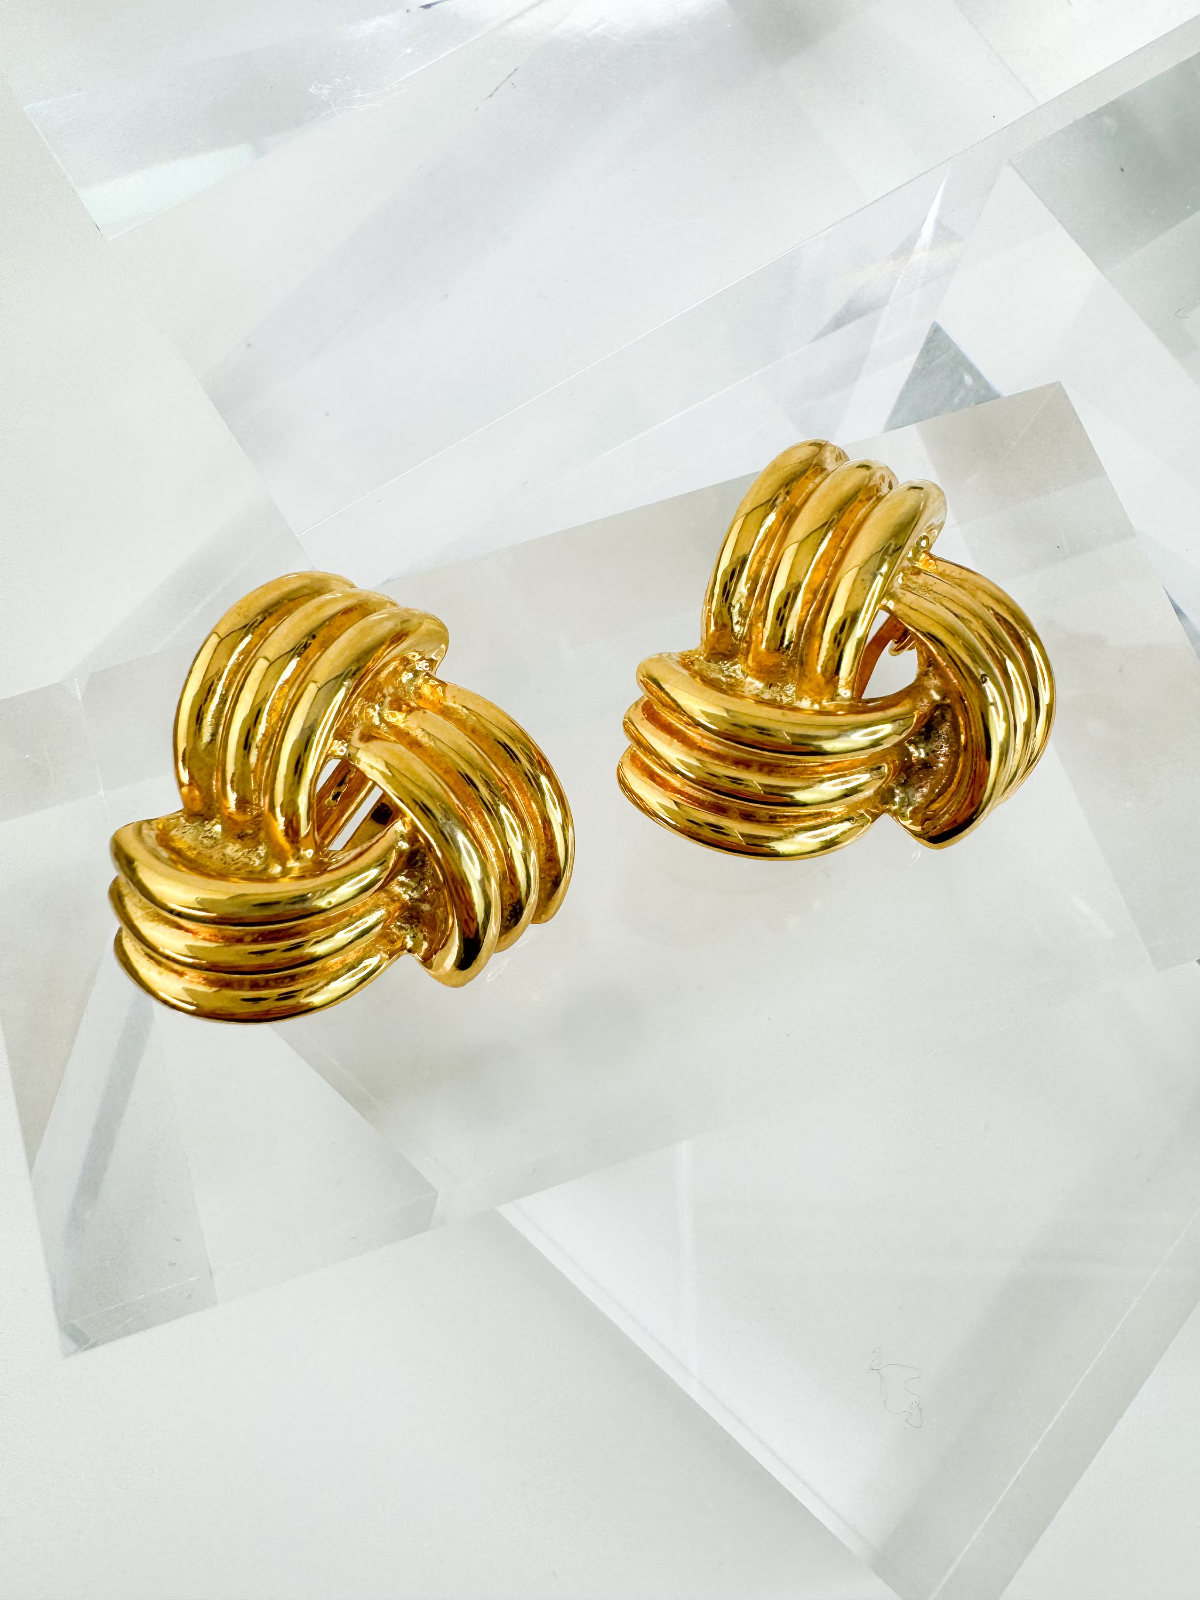 Vintage Givenchy rope  Earrings, Gold Tone Earrings, Clip on Earrings, Women Jewelry, Gift for her, Vintage Earrings, Jewelry Earrings